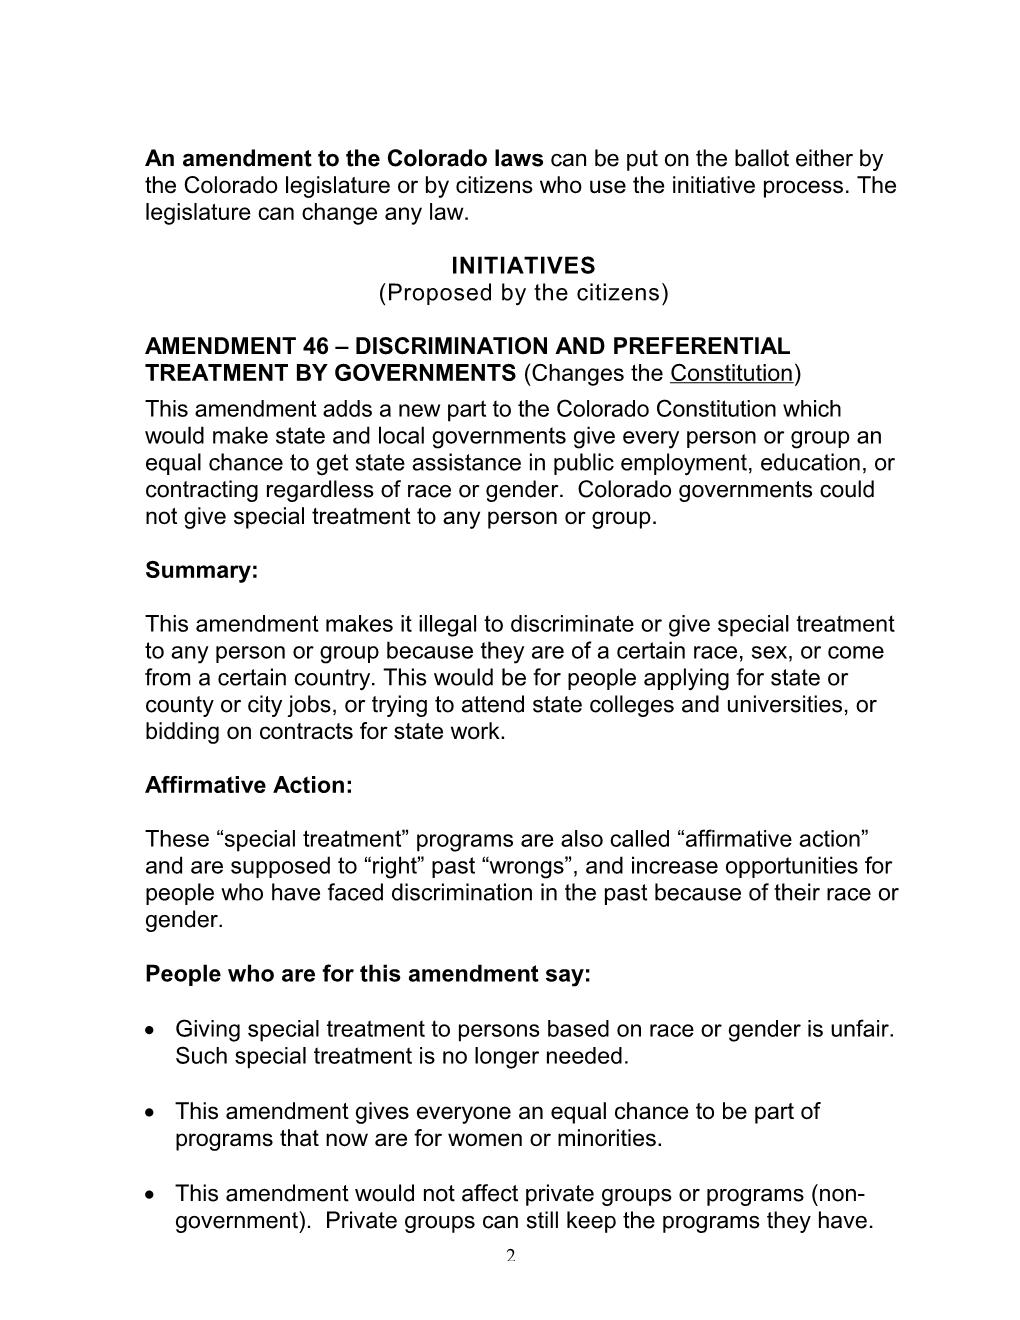 Note: This Document Was Developed in Partnership with the League of Women Voters of Colorado